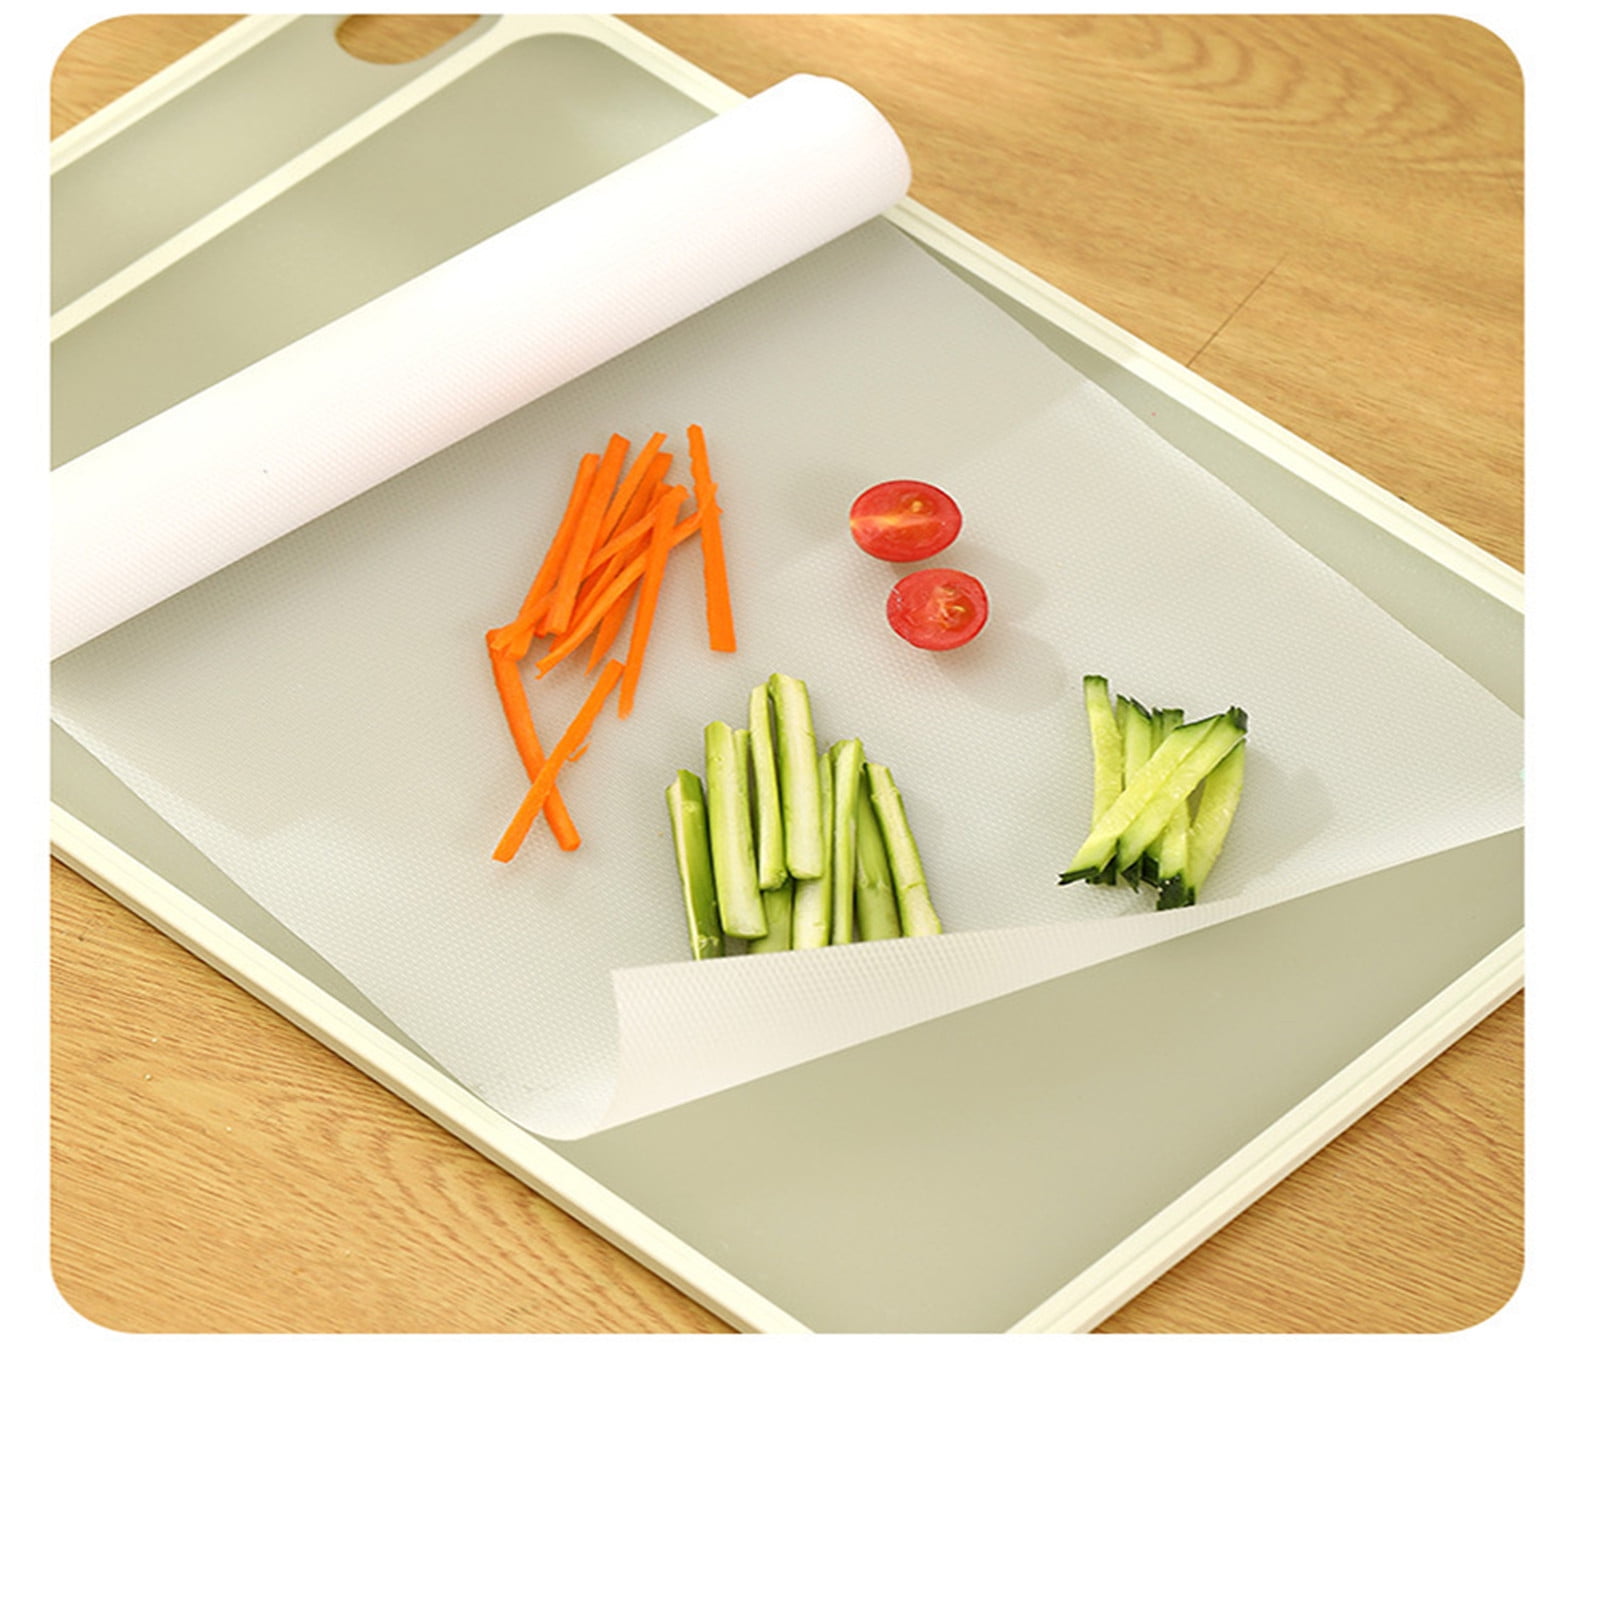 JoyJolt Plastic Cutting Board Set. White and Blue Cutting Boards for Kitchen Dishwasher Safe with Handle. Non Slip Large and Small Chopping Board